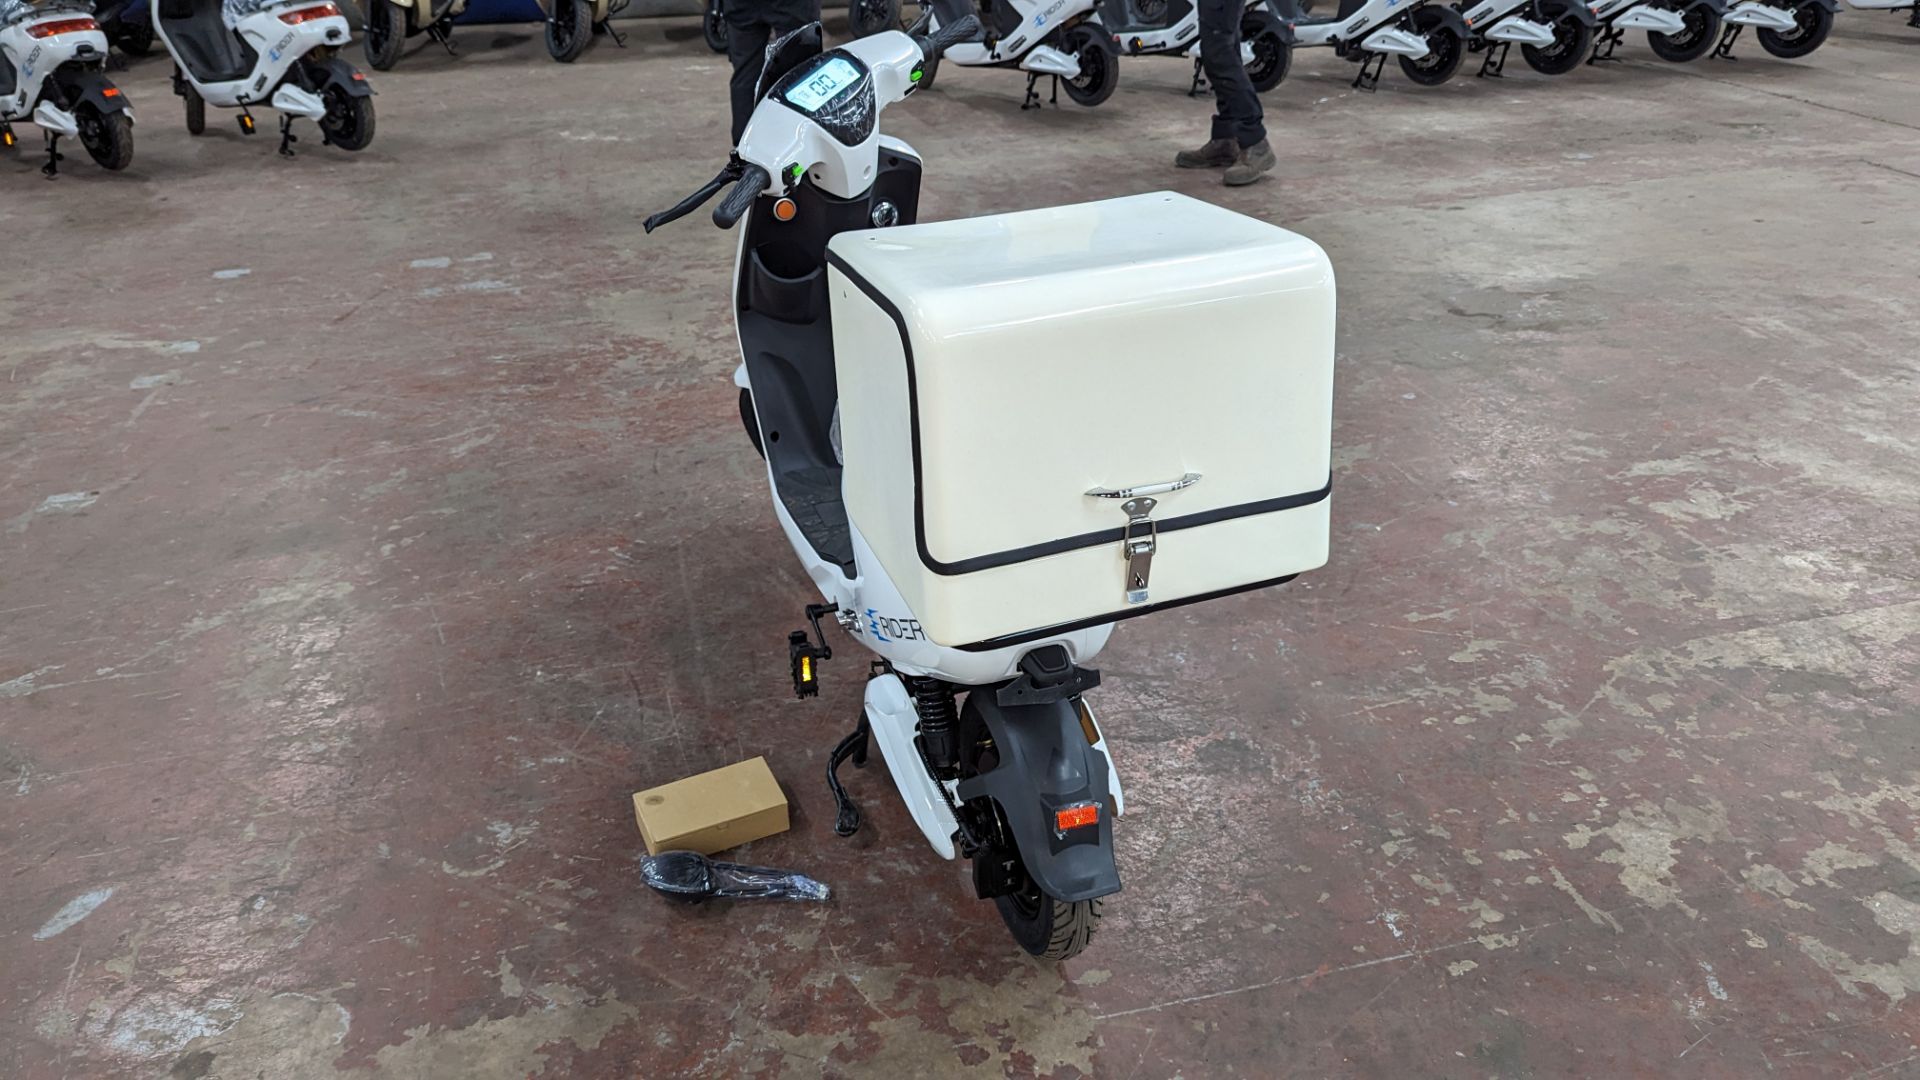 Model 18 Electric Bike: Zero (0) recorded miles, white body with black detailing, insulated box moun - Image 5 of 13